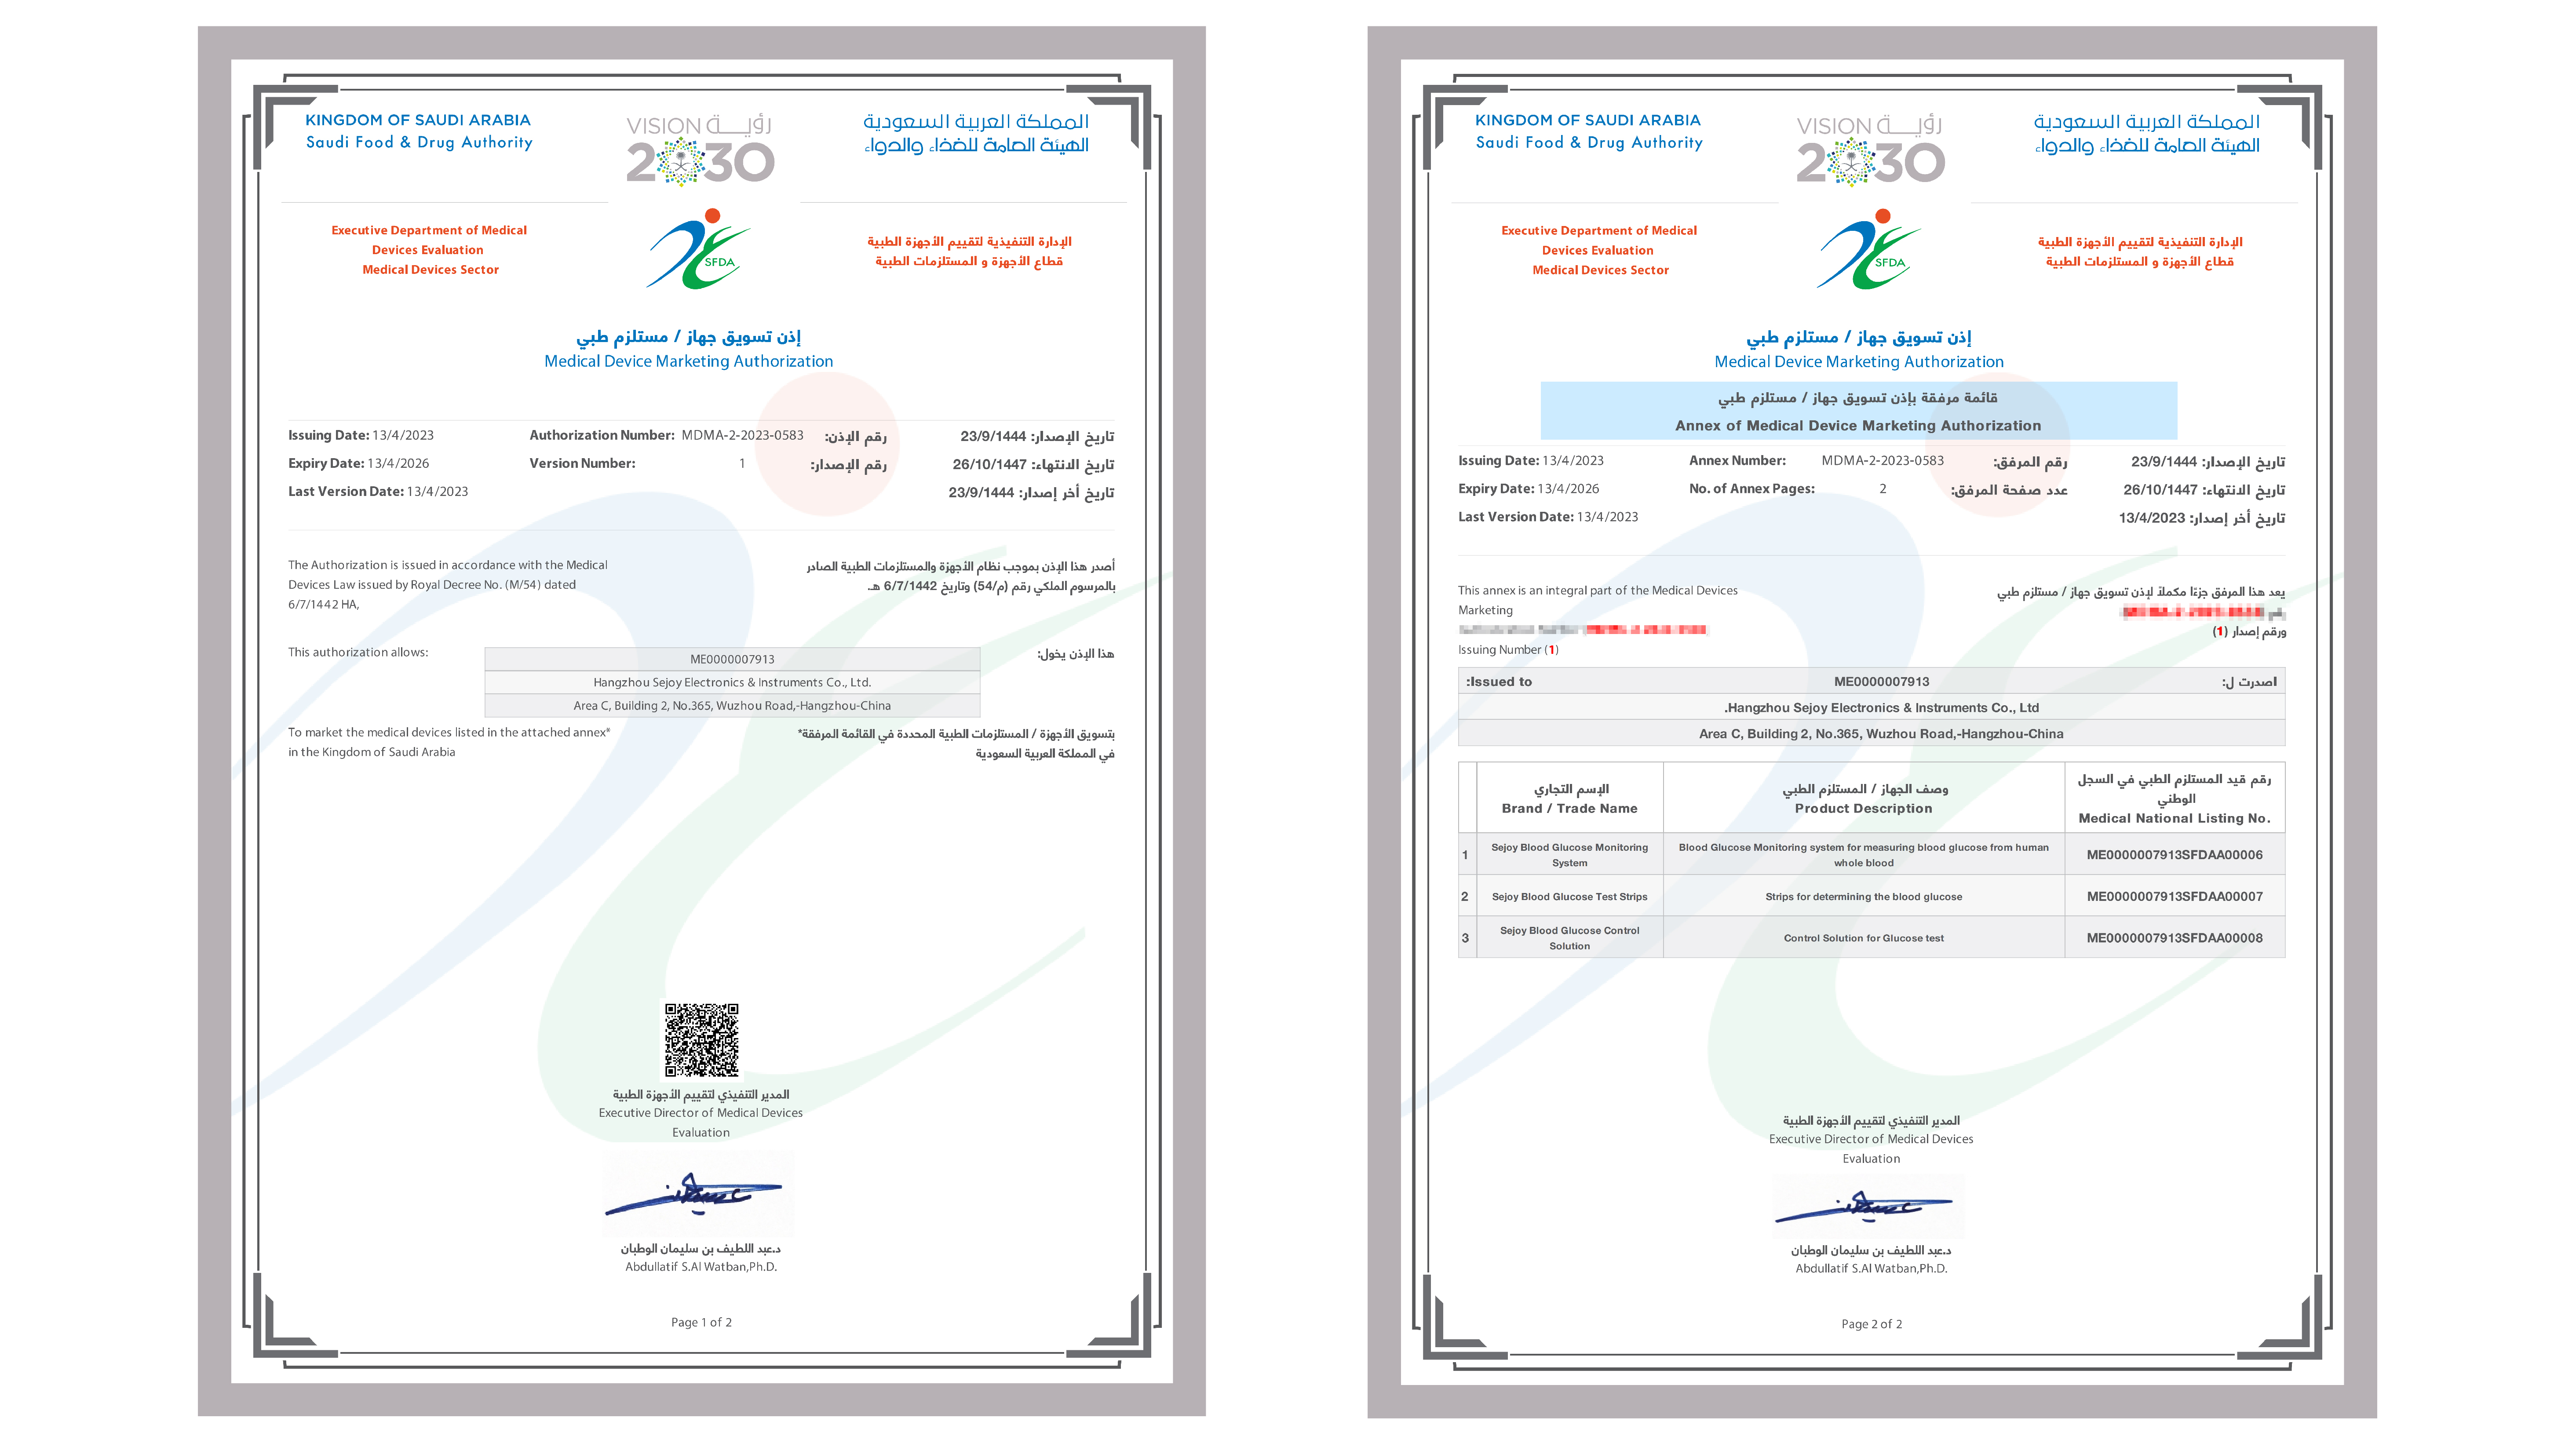 Congratulations to Hangzhou Sejoy Blood Glucose Monitoring System for obtaining the Saudi Arabia MDMA certificate!